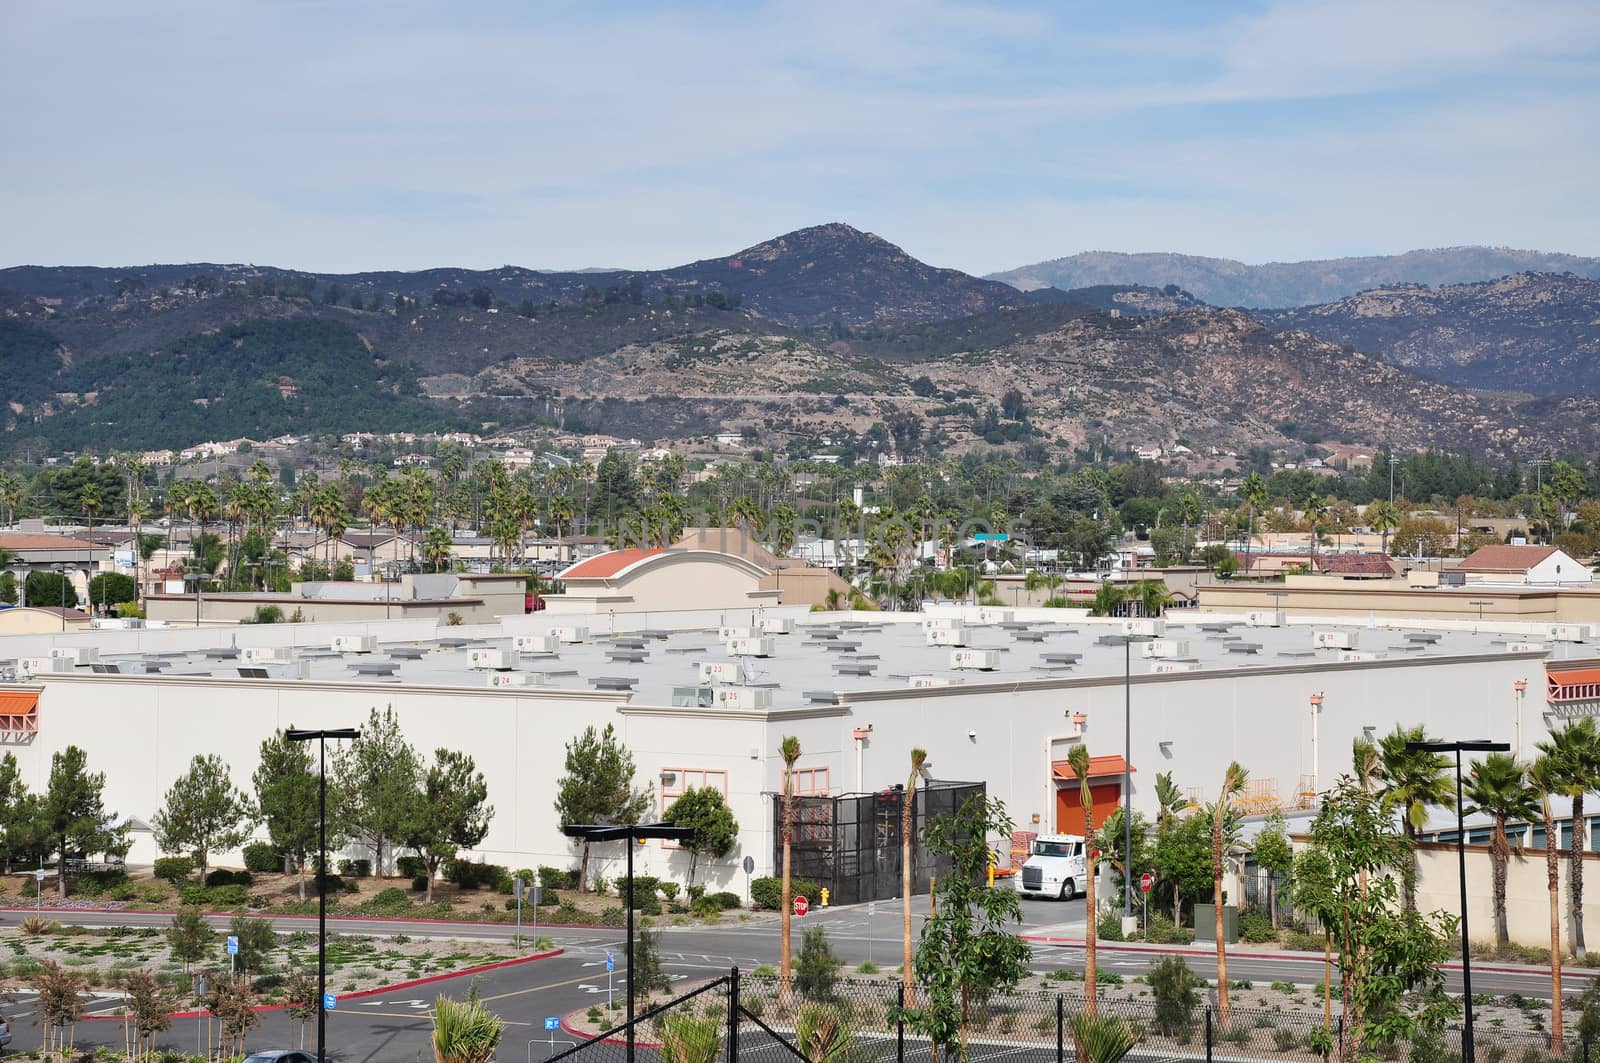 View of the commercial district in Escondido, California.